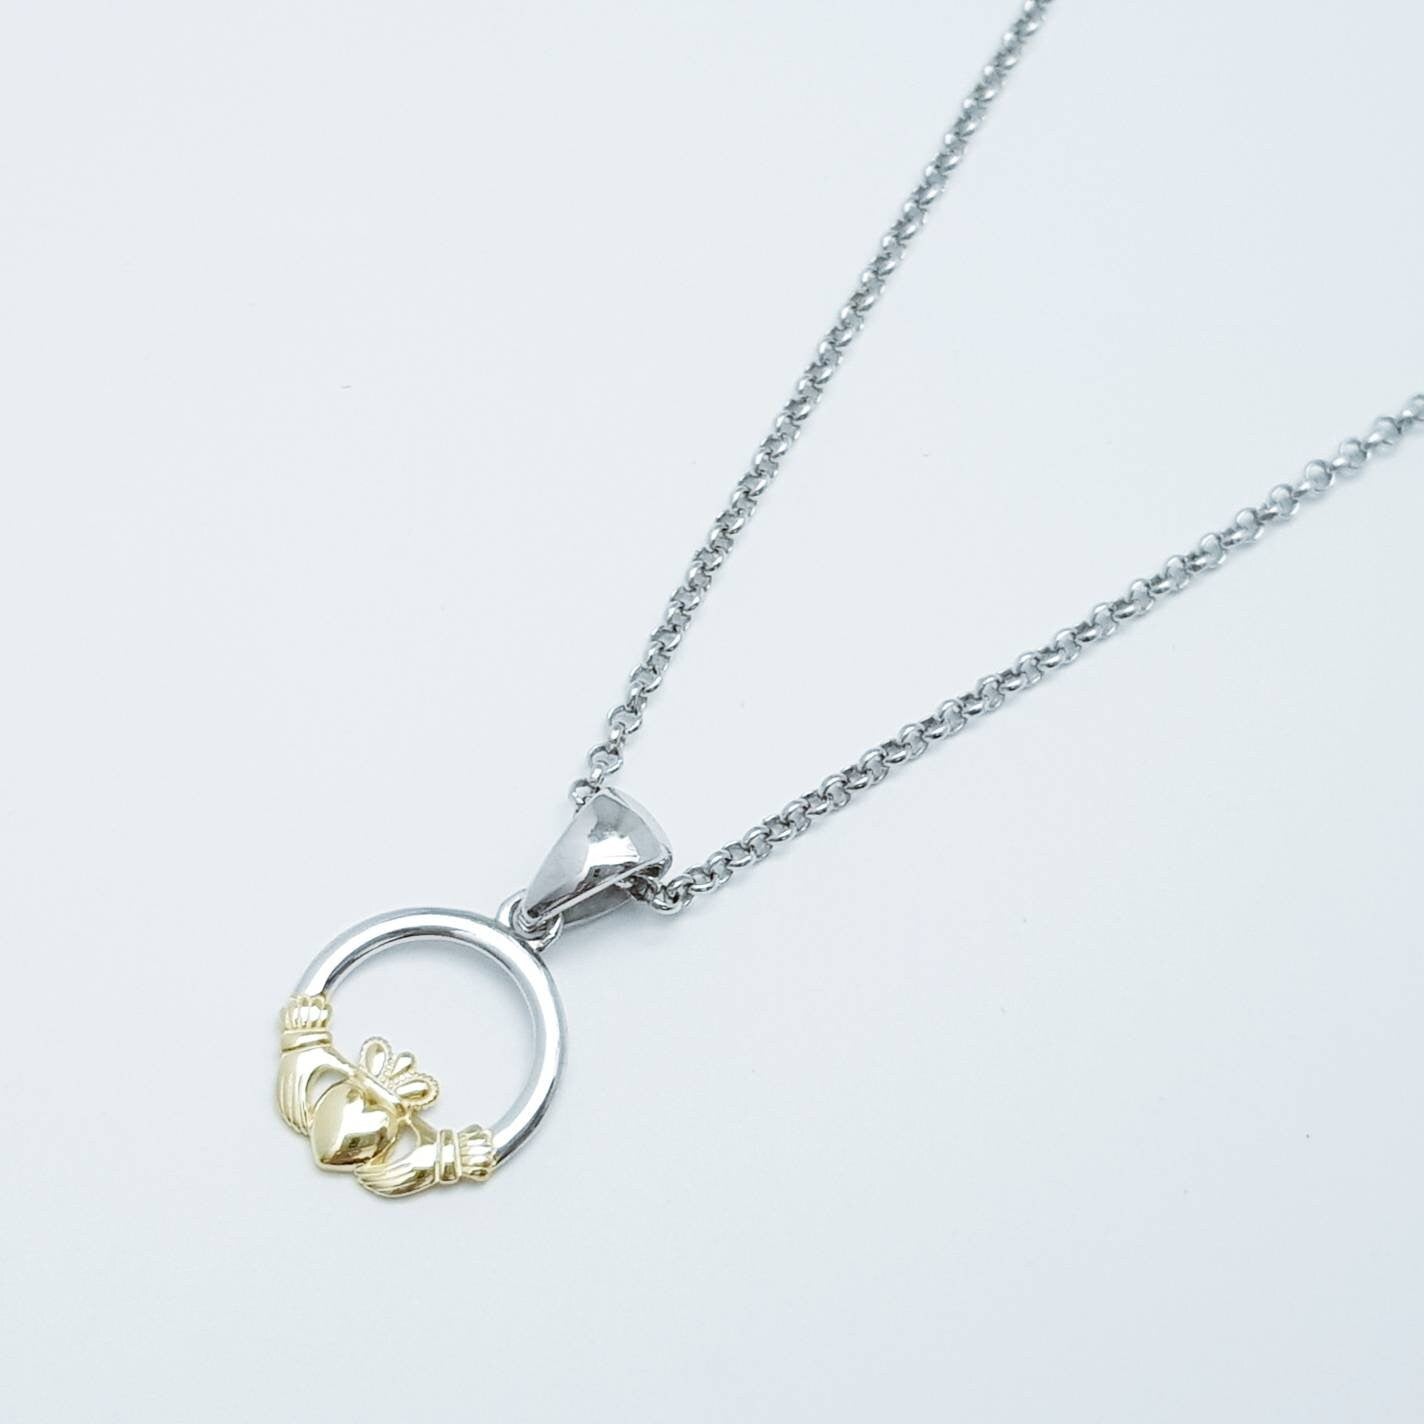 Dainty Claddagh pendant, Irish claddagh necklace from Galway, Gold and Silver claddagh necklace